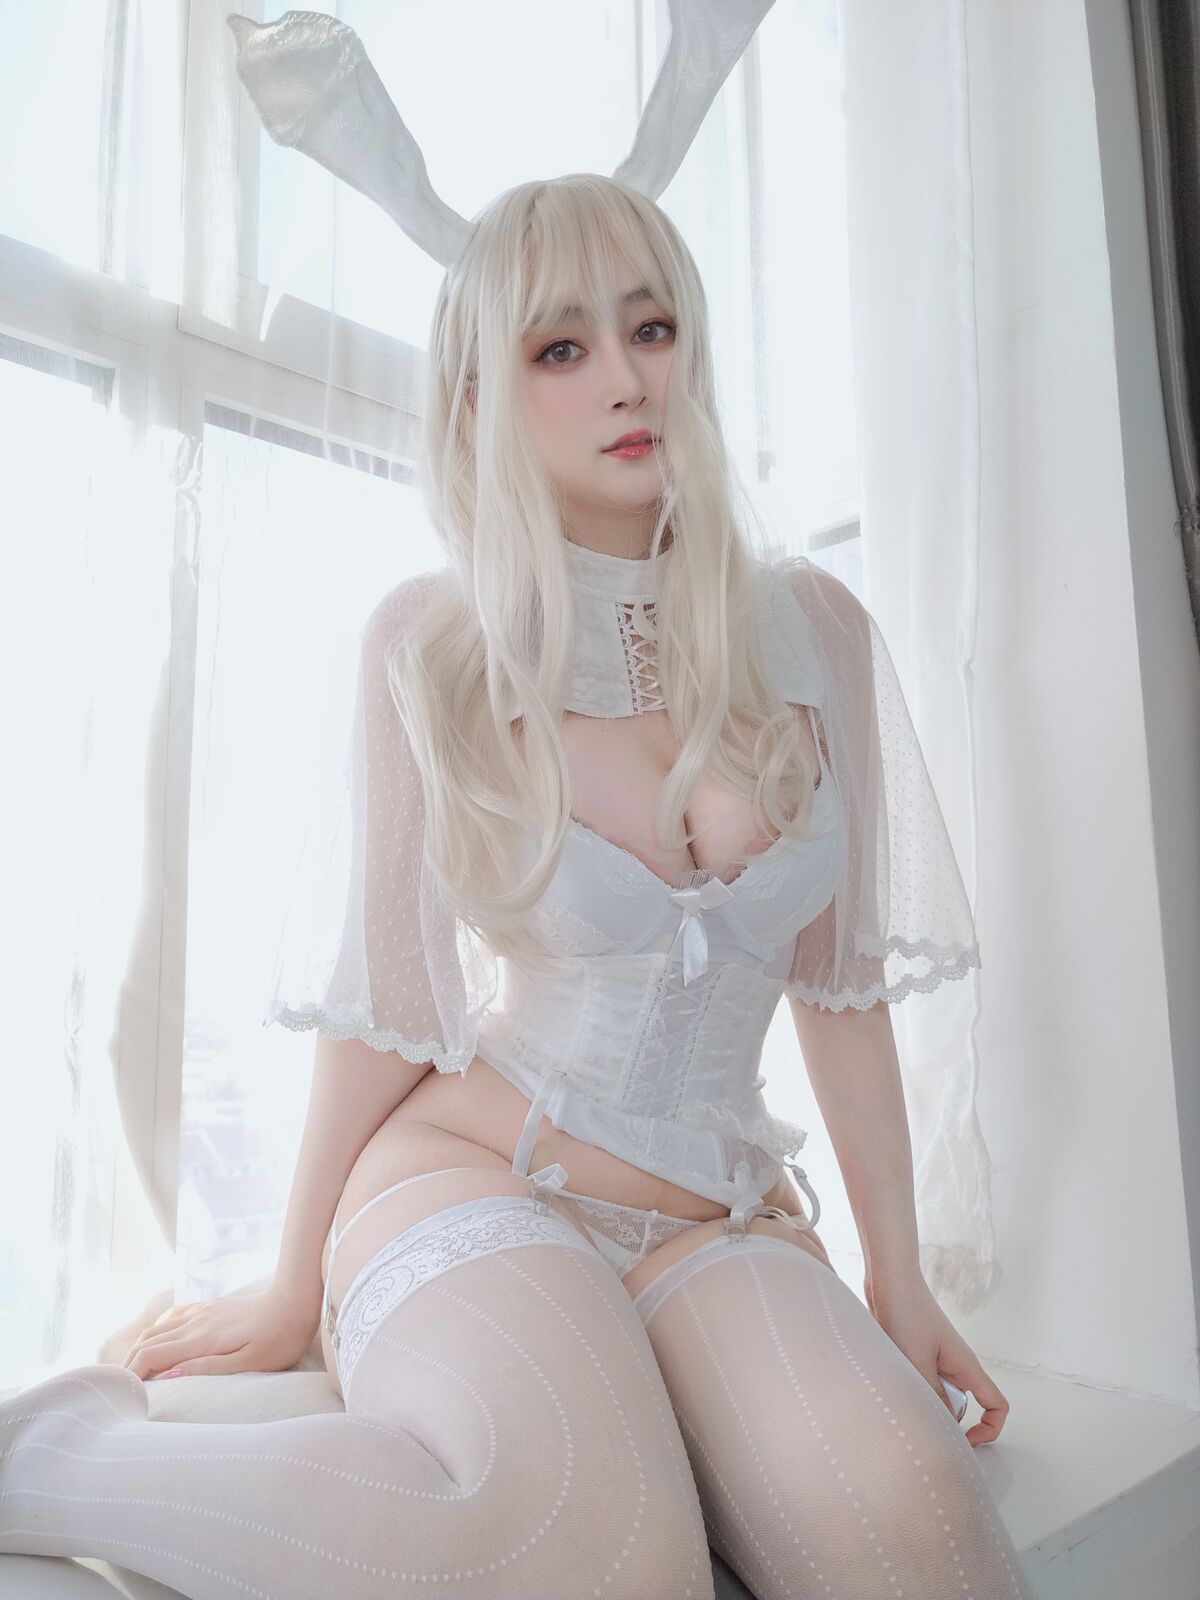 View - Coser@白银81 - 白丝兔兔兔兔 - 